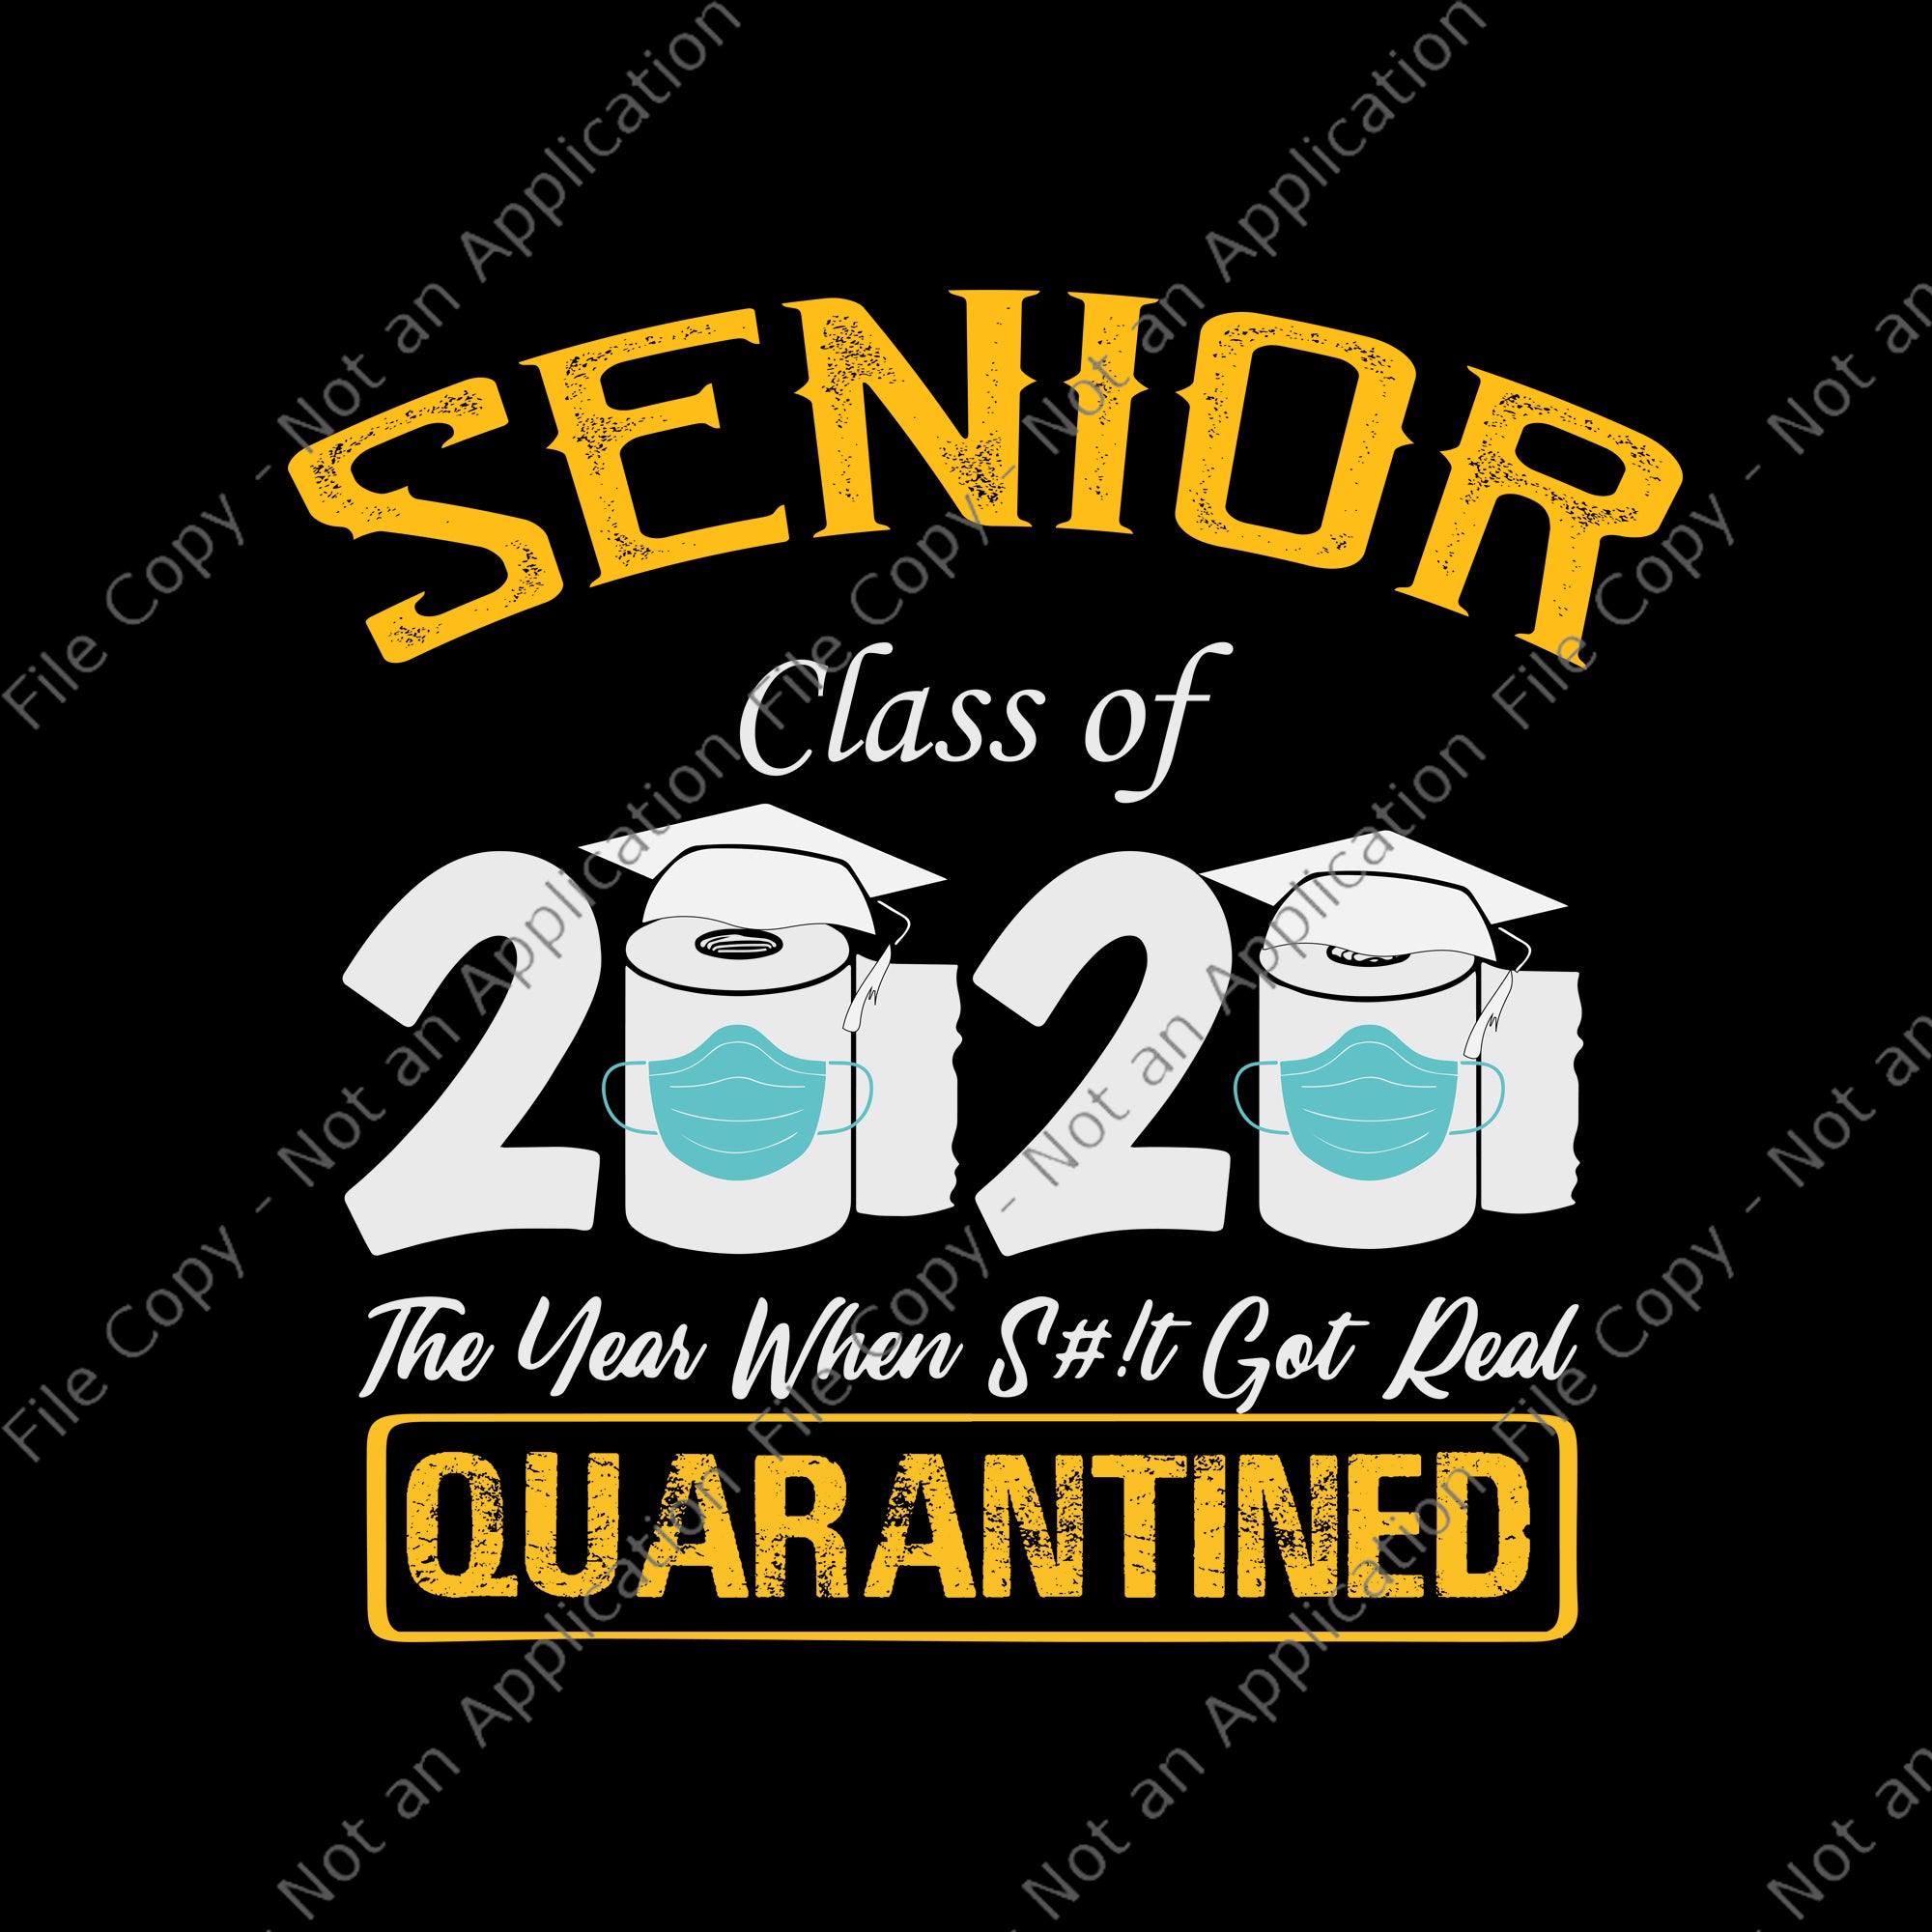 Senior class of 2020 the year when shit got real quarantined svg, senior class of 2020 shit just got real svg, senior class of 2020 shit just got real, senior 2020 png, eps, dxf svg file